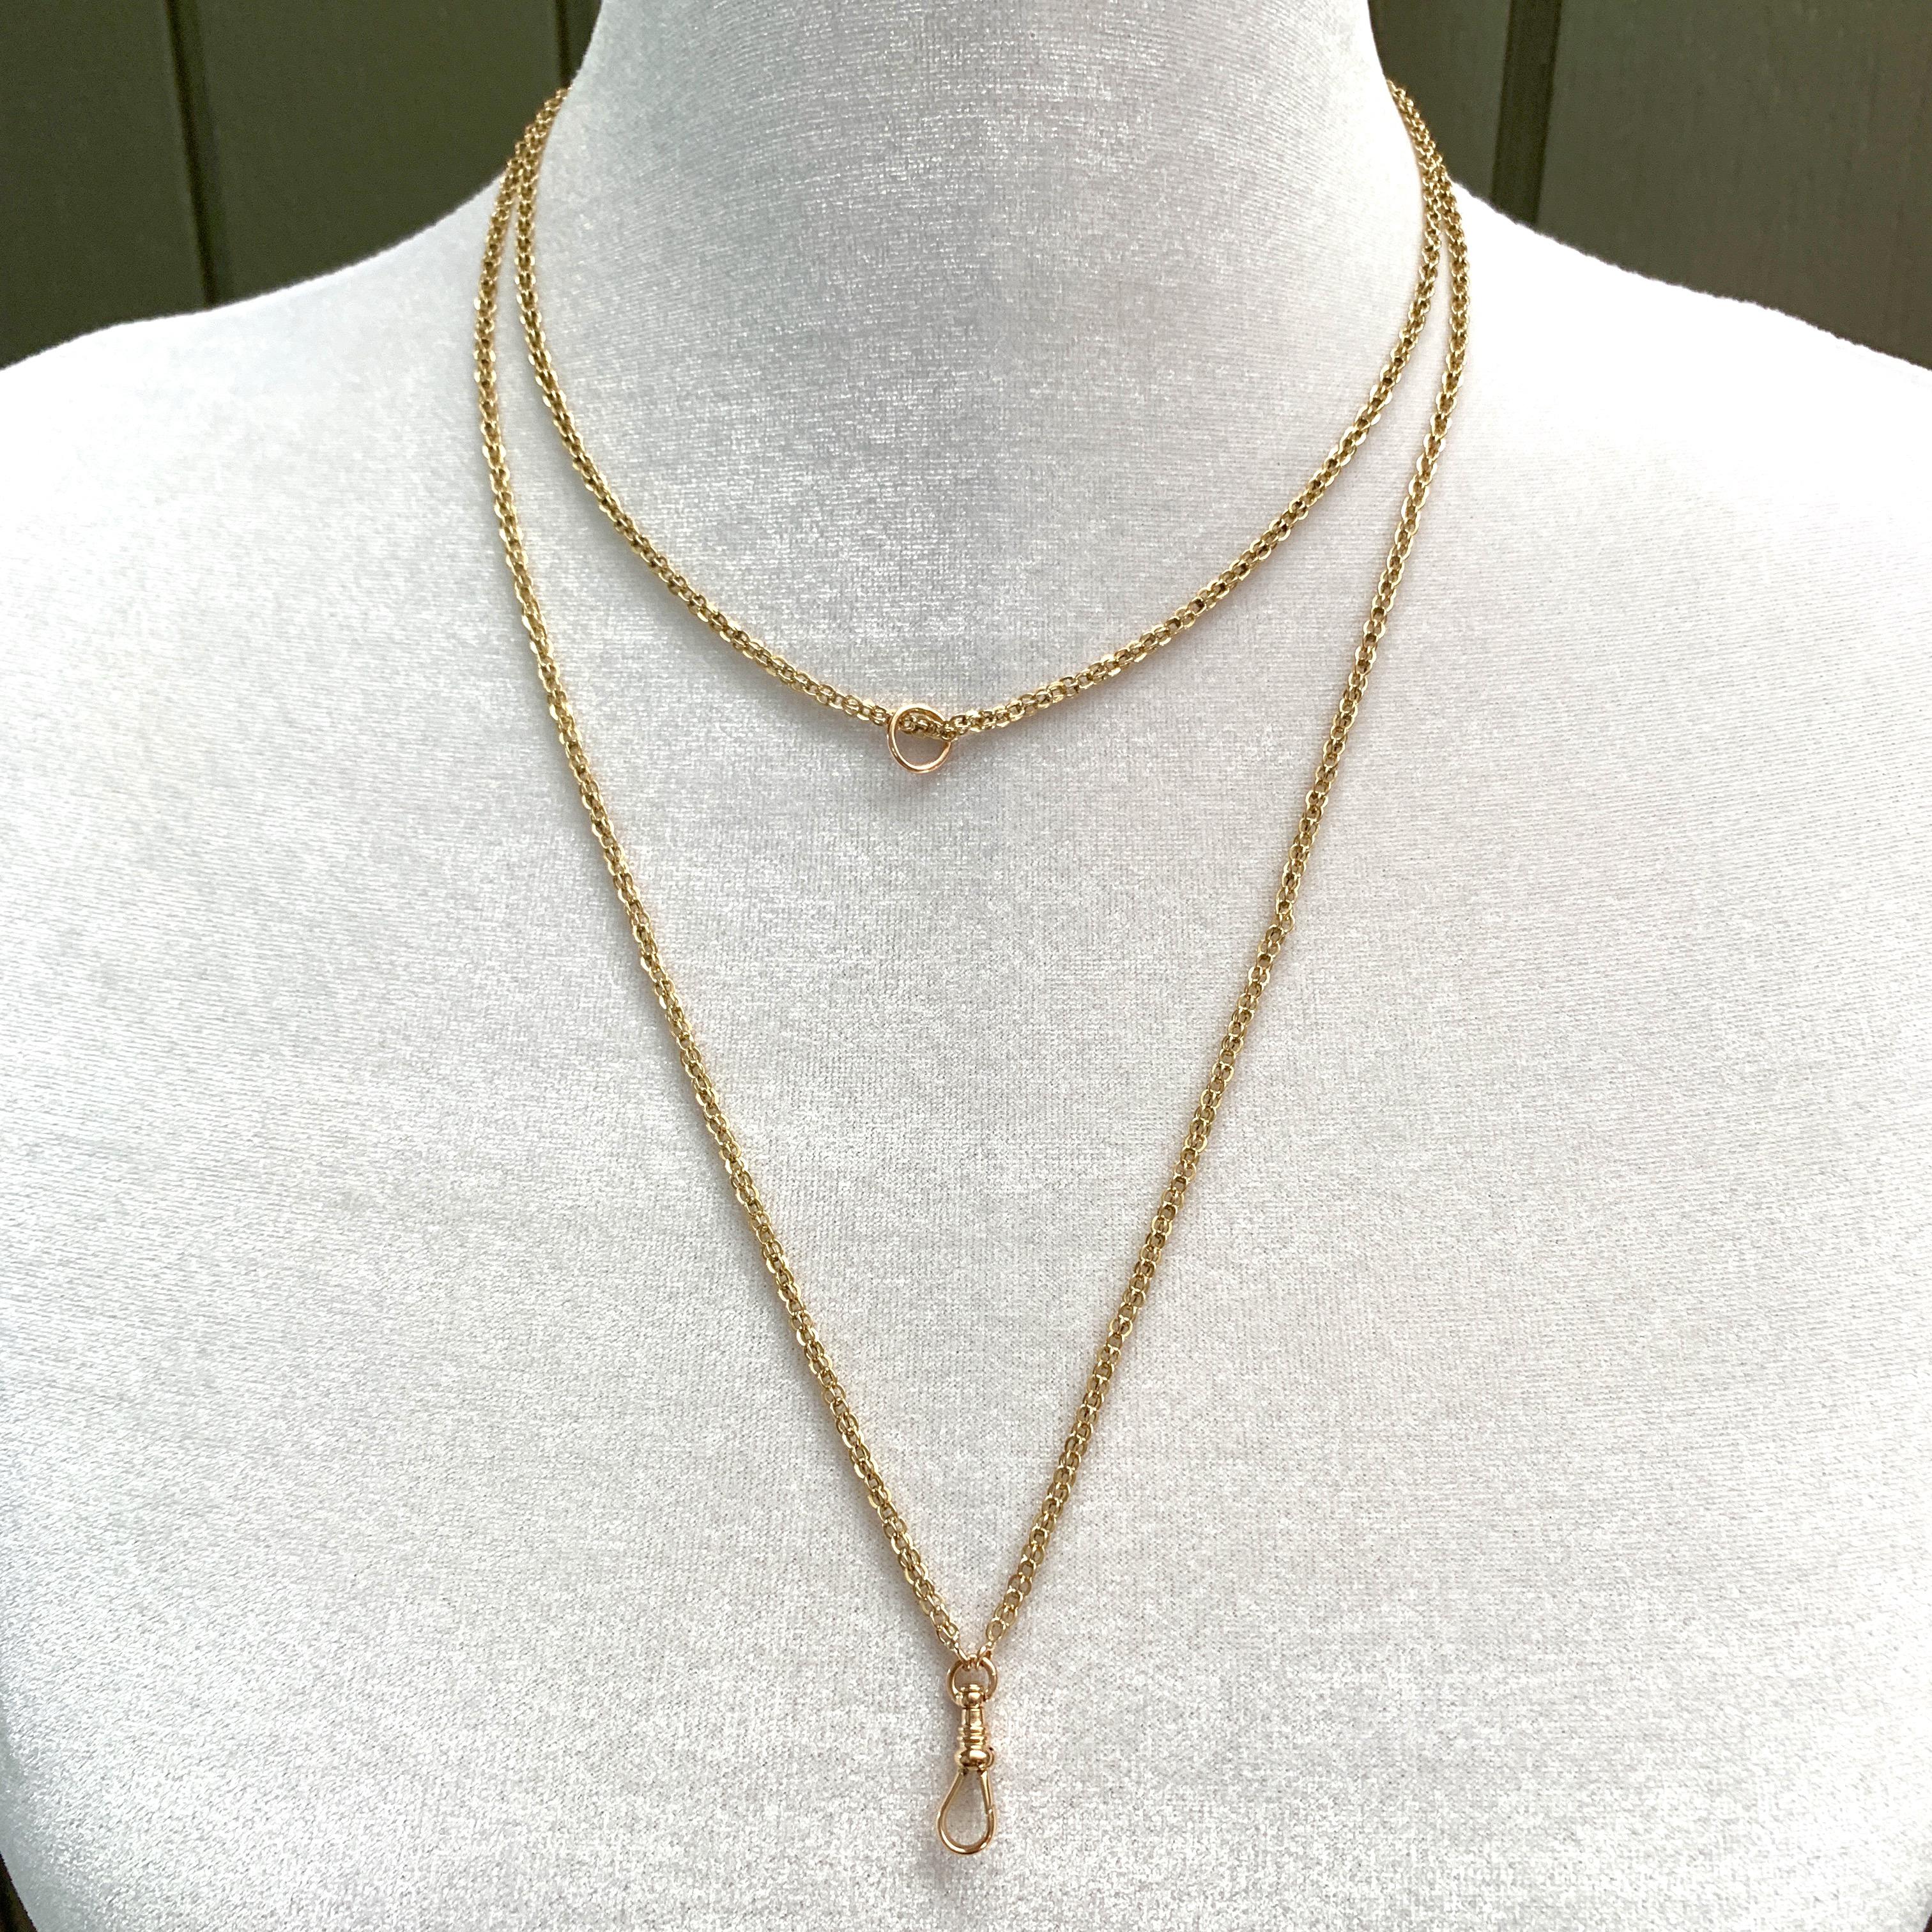 While not particularly thin, the airiness of the open cage links and the size of the swivel clip on this long guard chain lead us to believe it was originally a lady's chain.  

A fine quality gold chain in this length was as versatile 100+ years